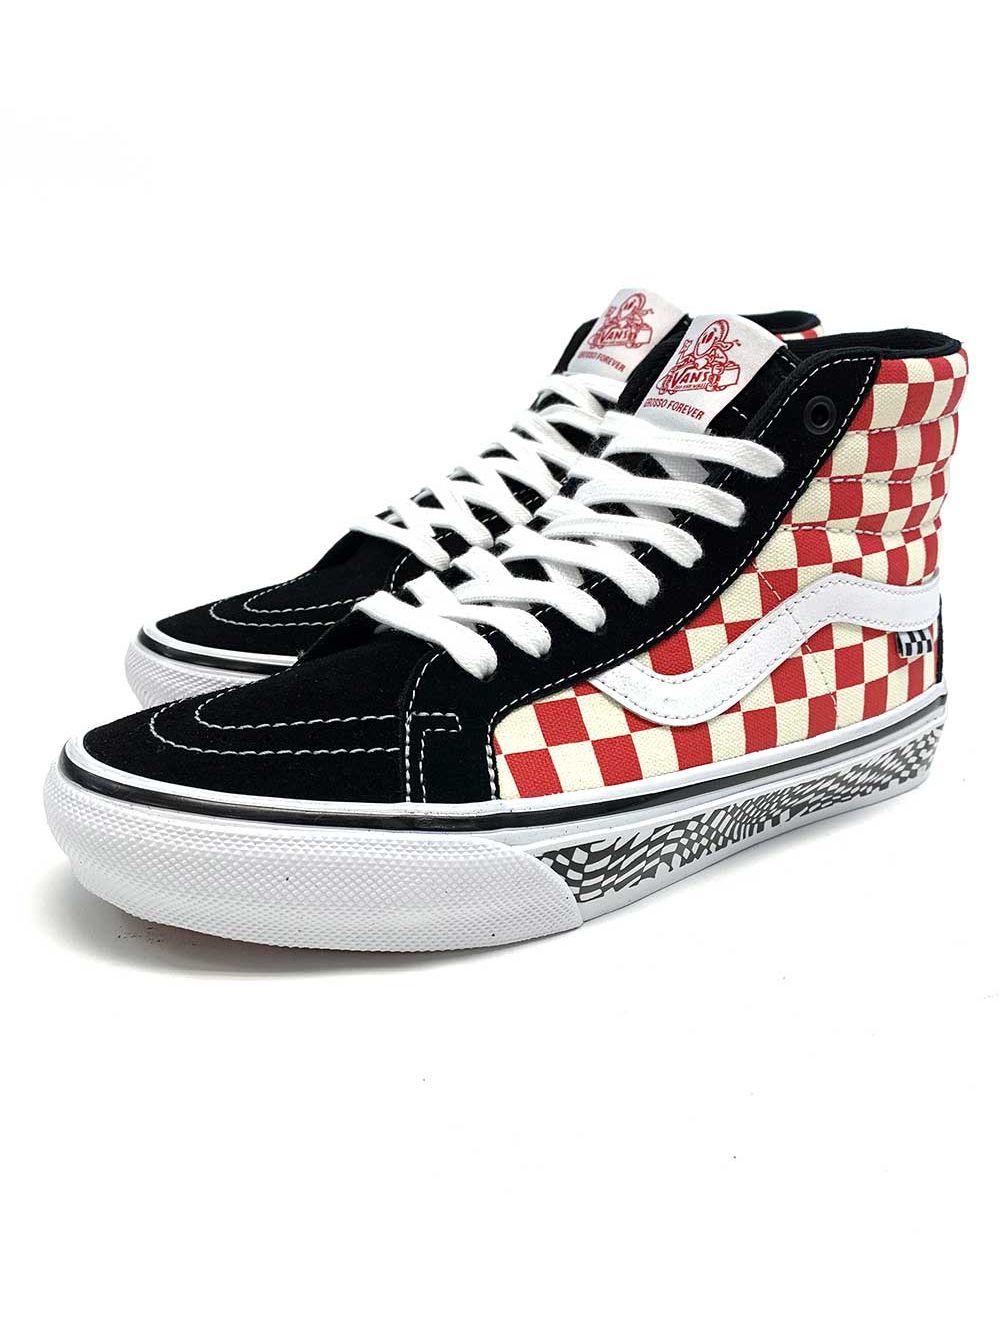 red high top vans checkered